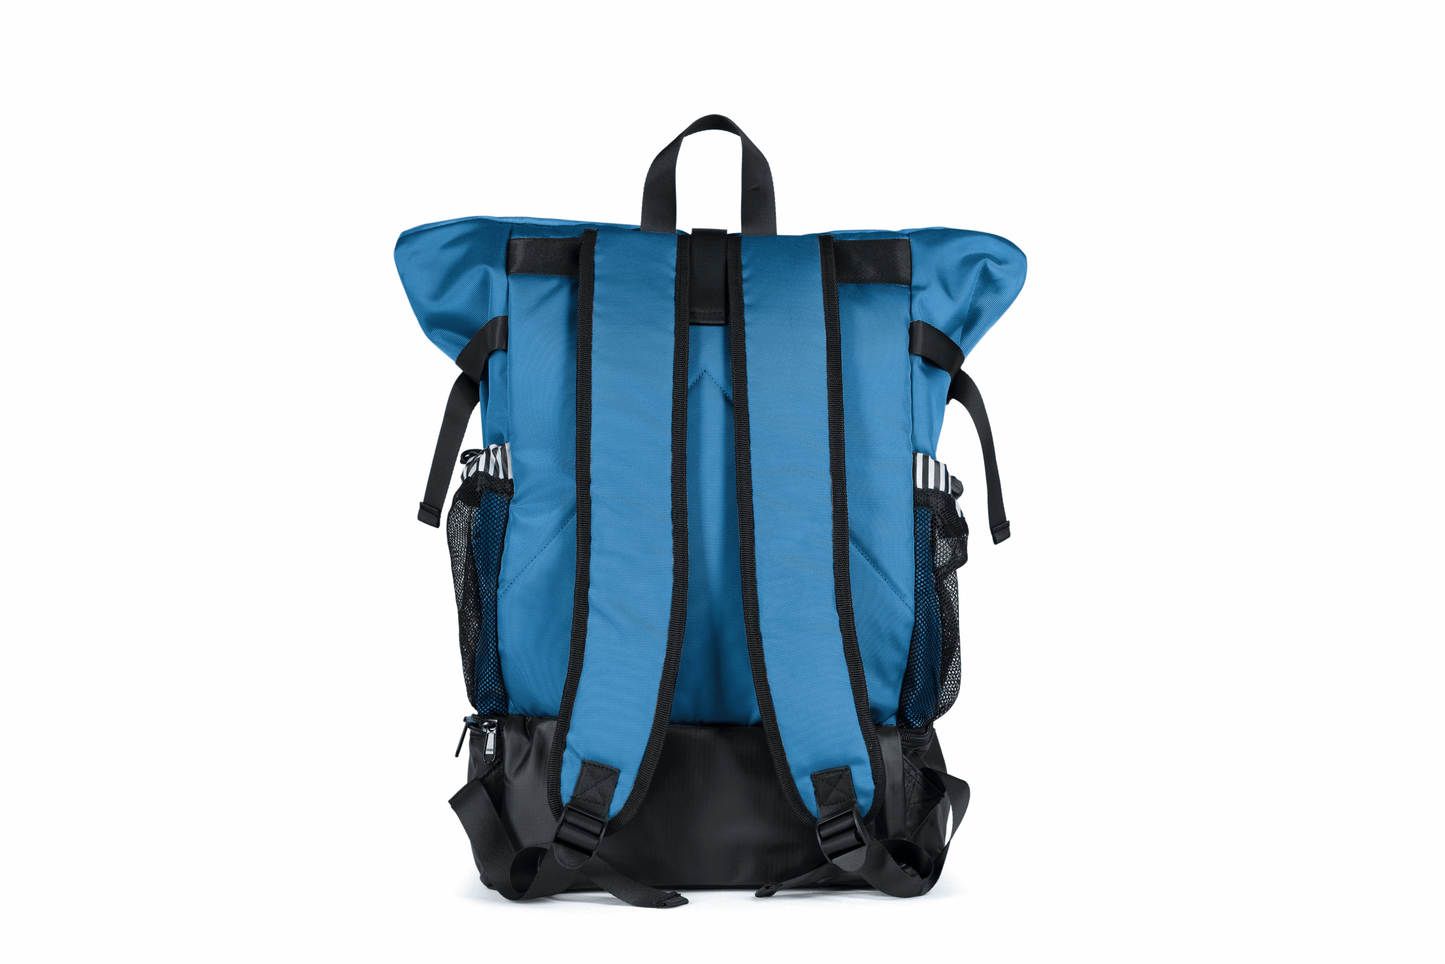 The Roo betty Nyx back pack has padded shoulder straps to ensure comfort when wearing 